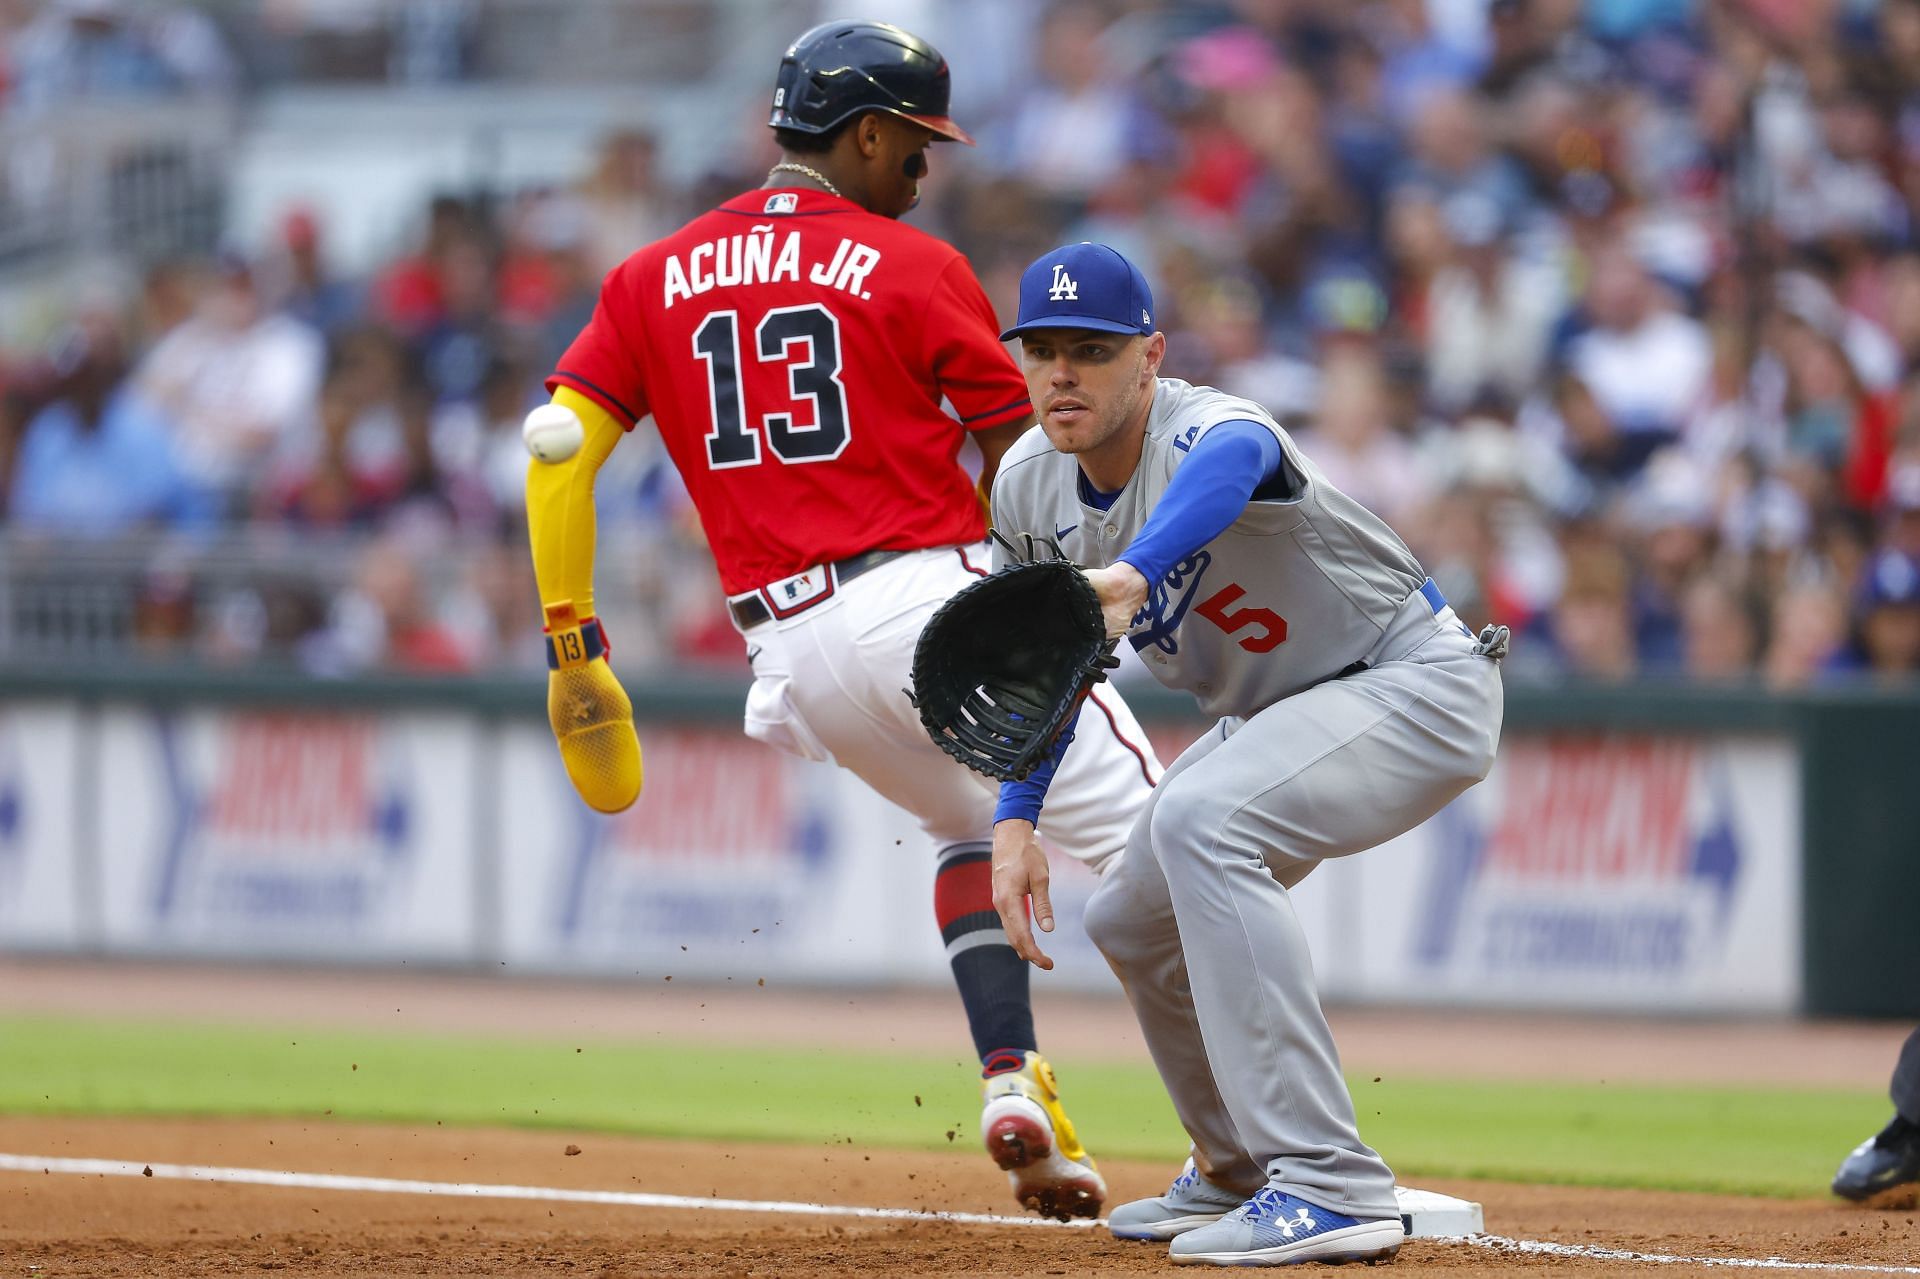 Freddie Freeman of the Los Angeles Dodgers takes the throw during the first inning at Truist Park